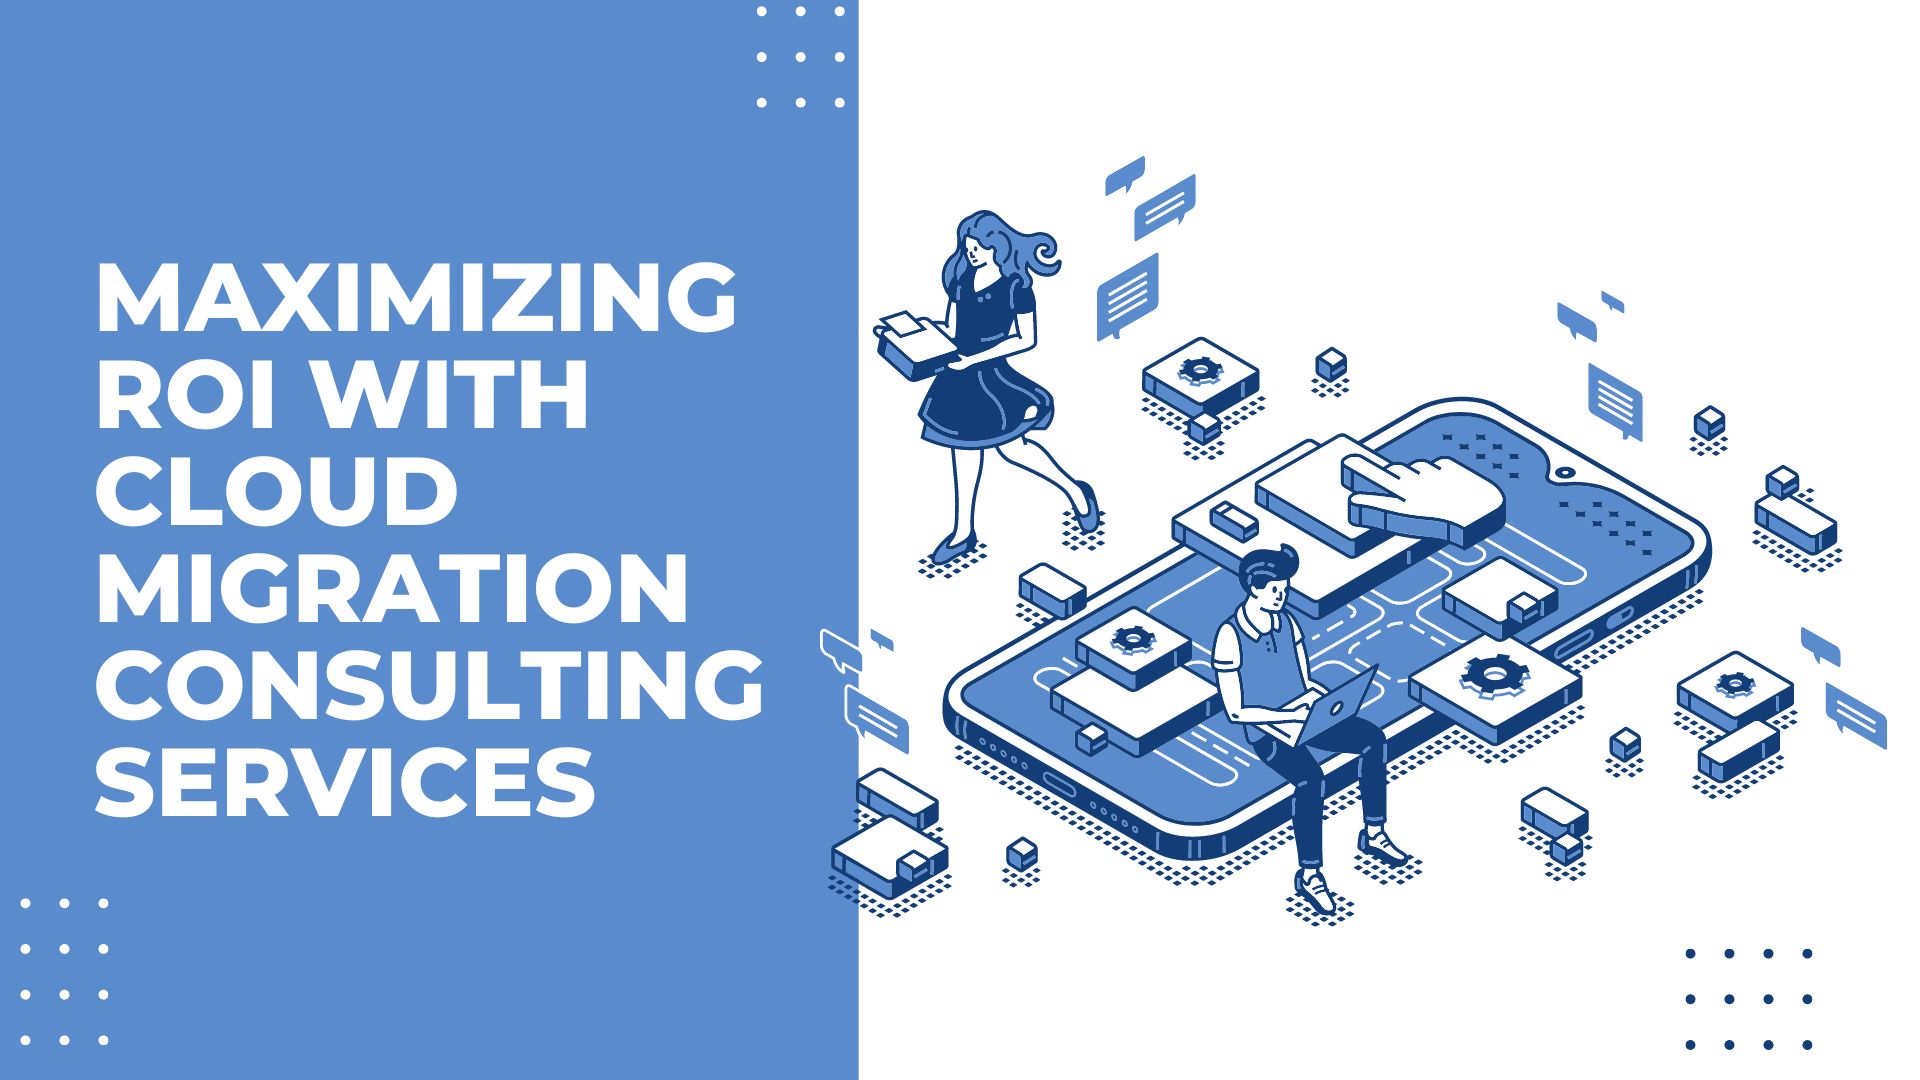 Maximizing ROI with Cloud Migration Consulting Services